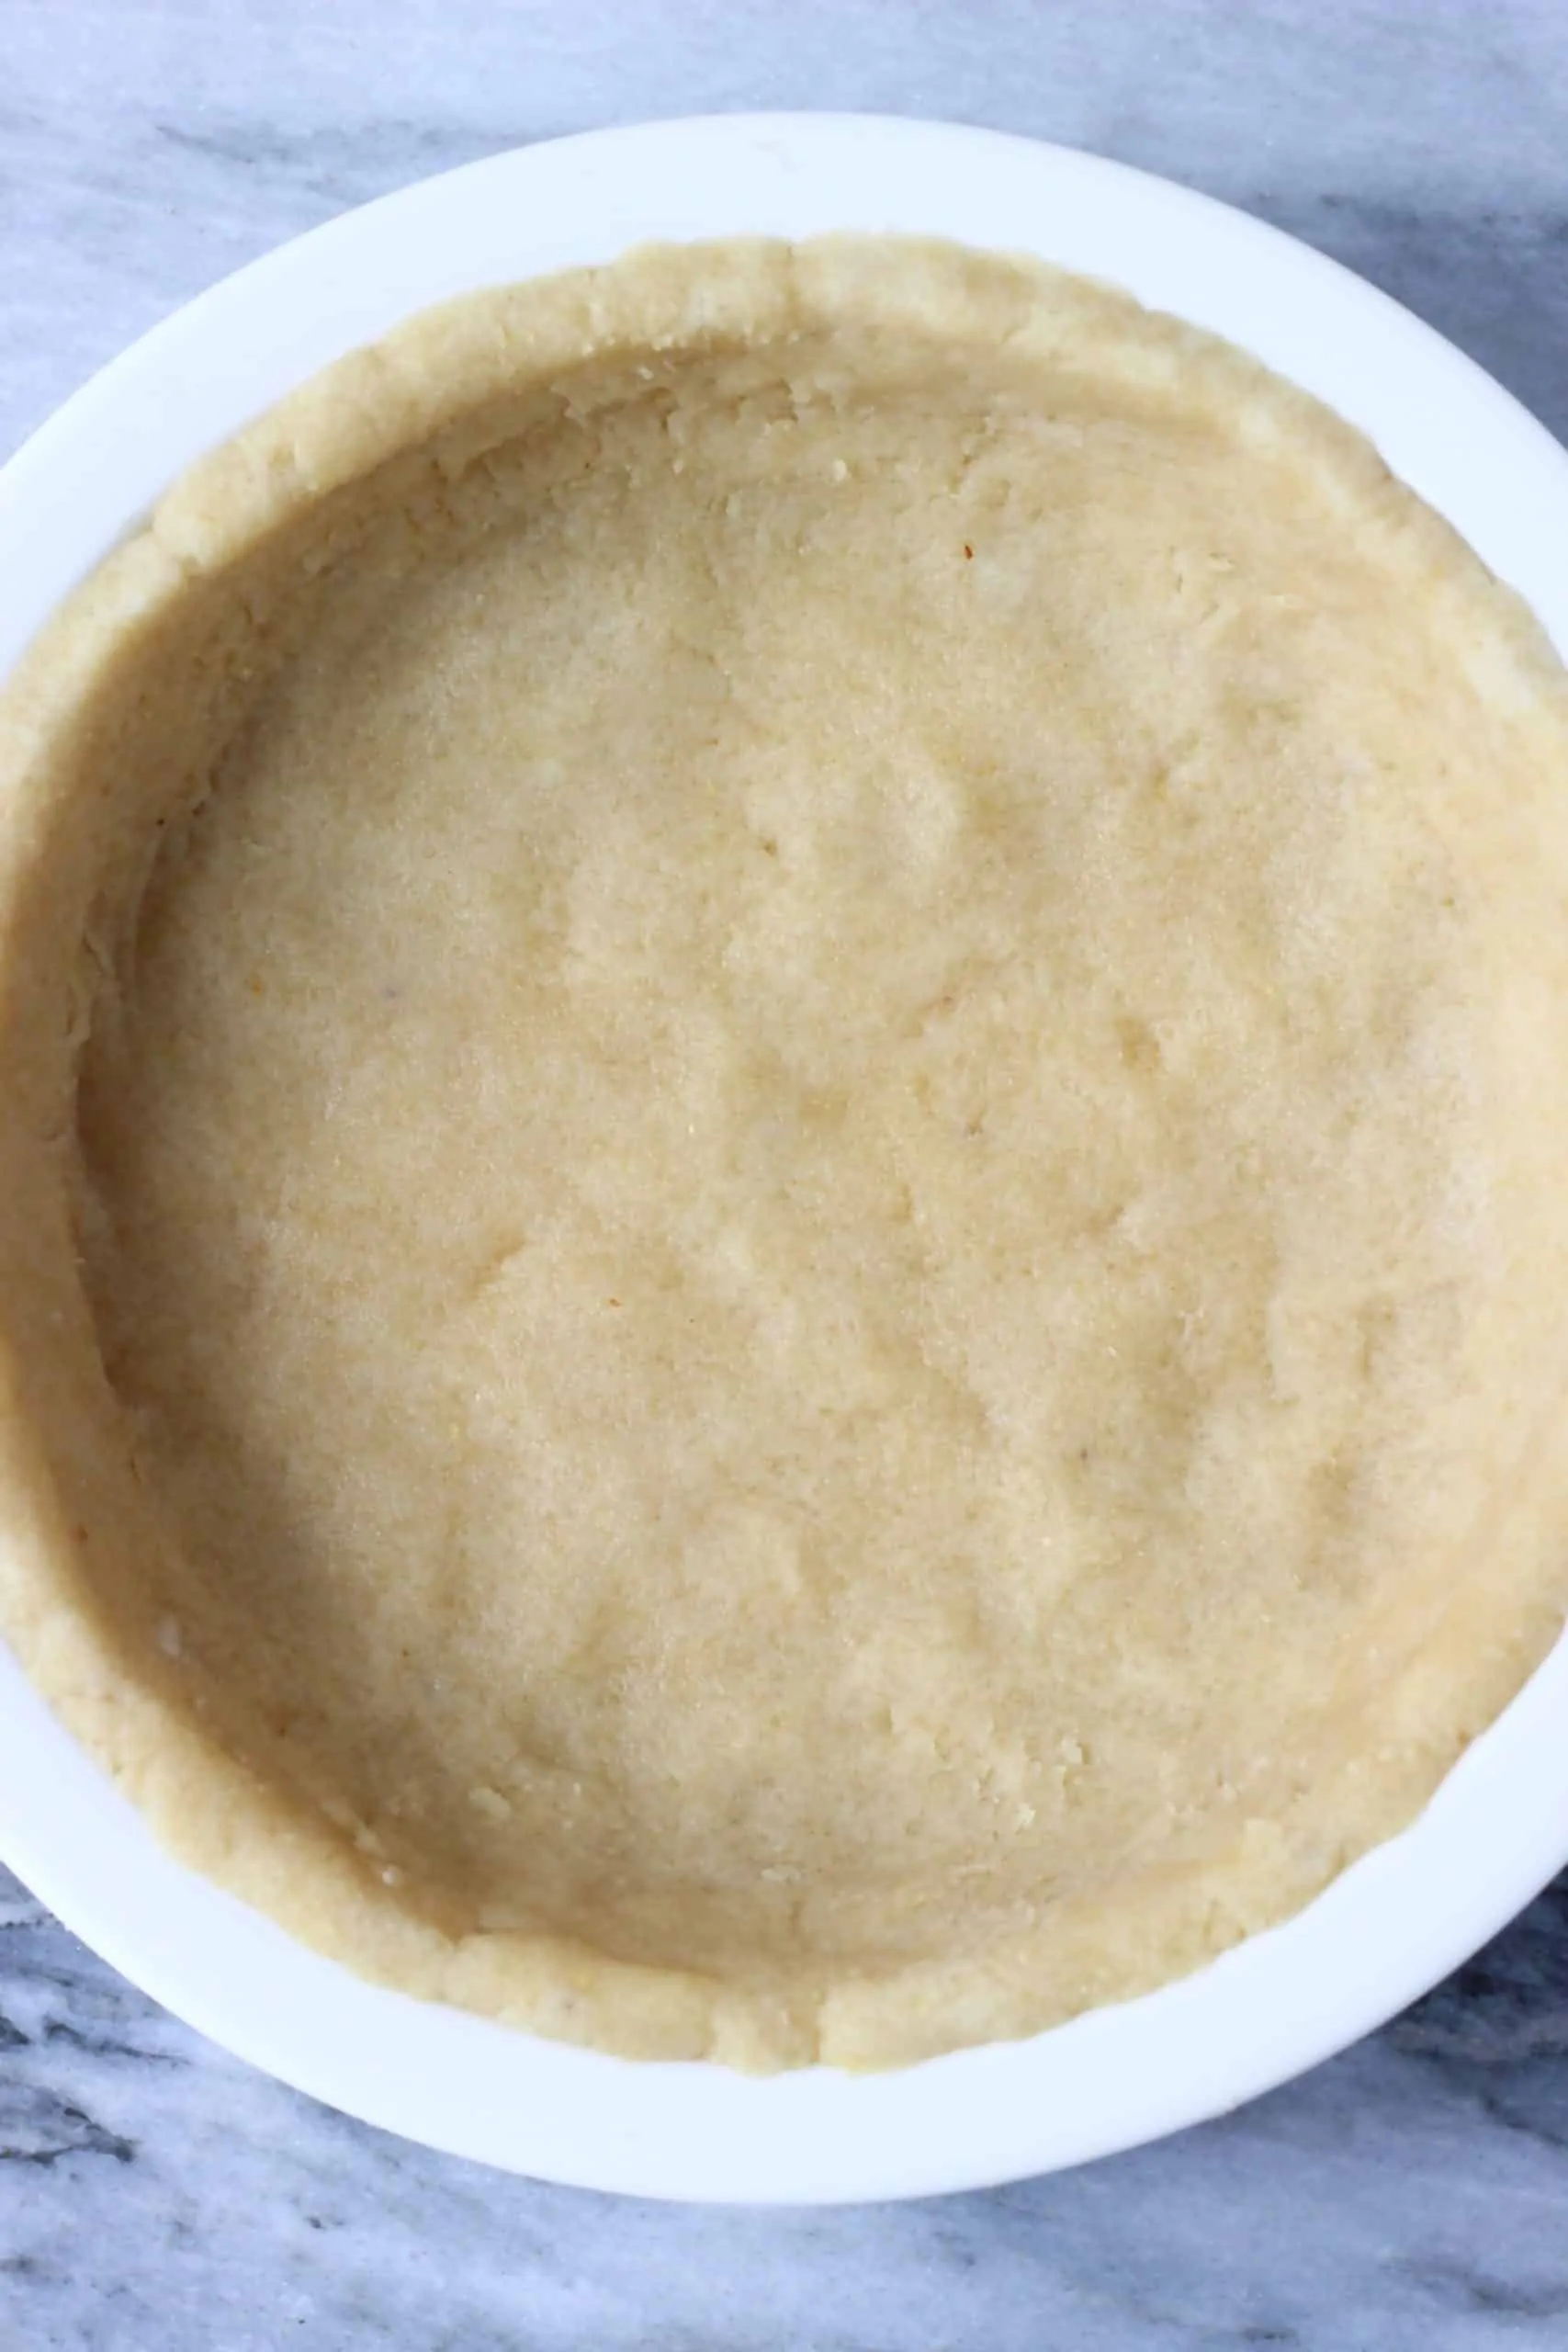 Raw gluten-free vegan pastry dough pressed along the bottom and sides of a pie dish